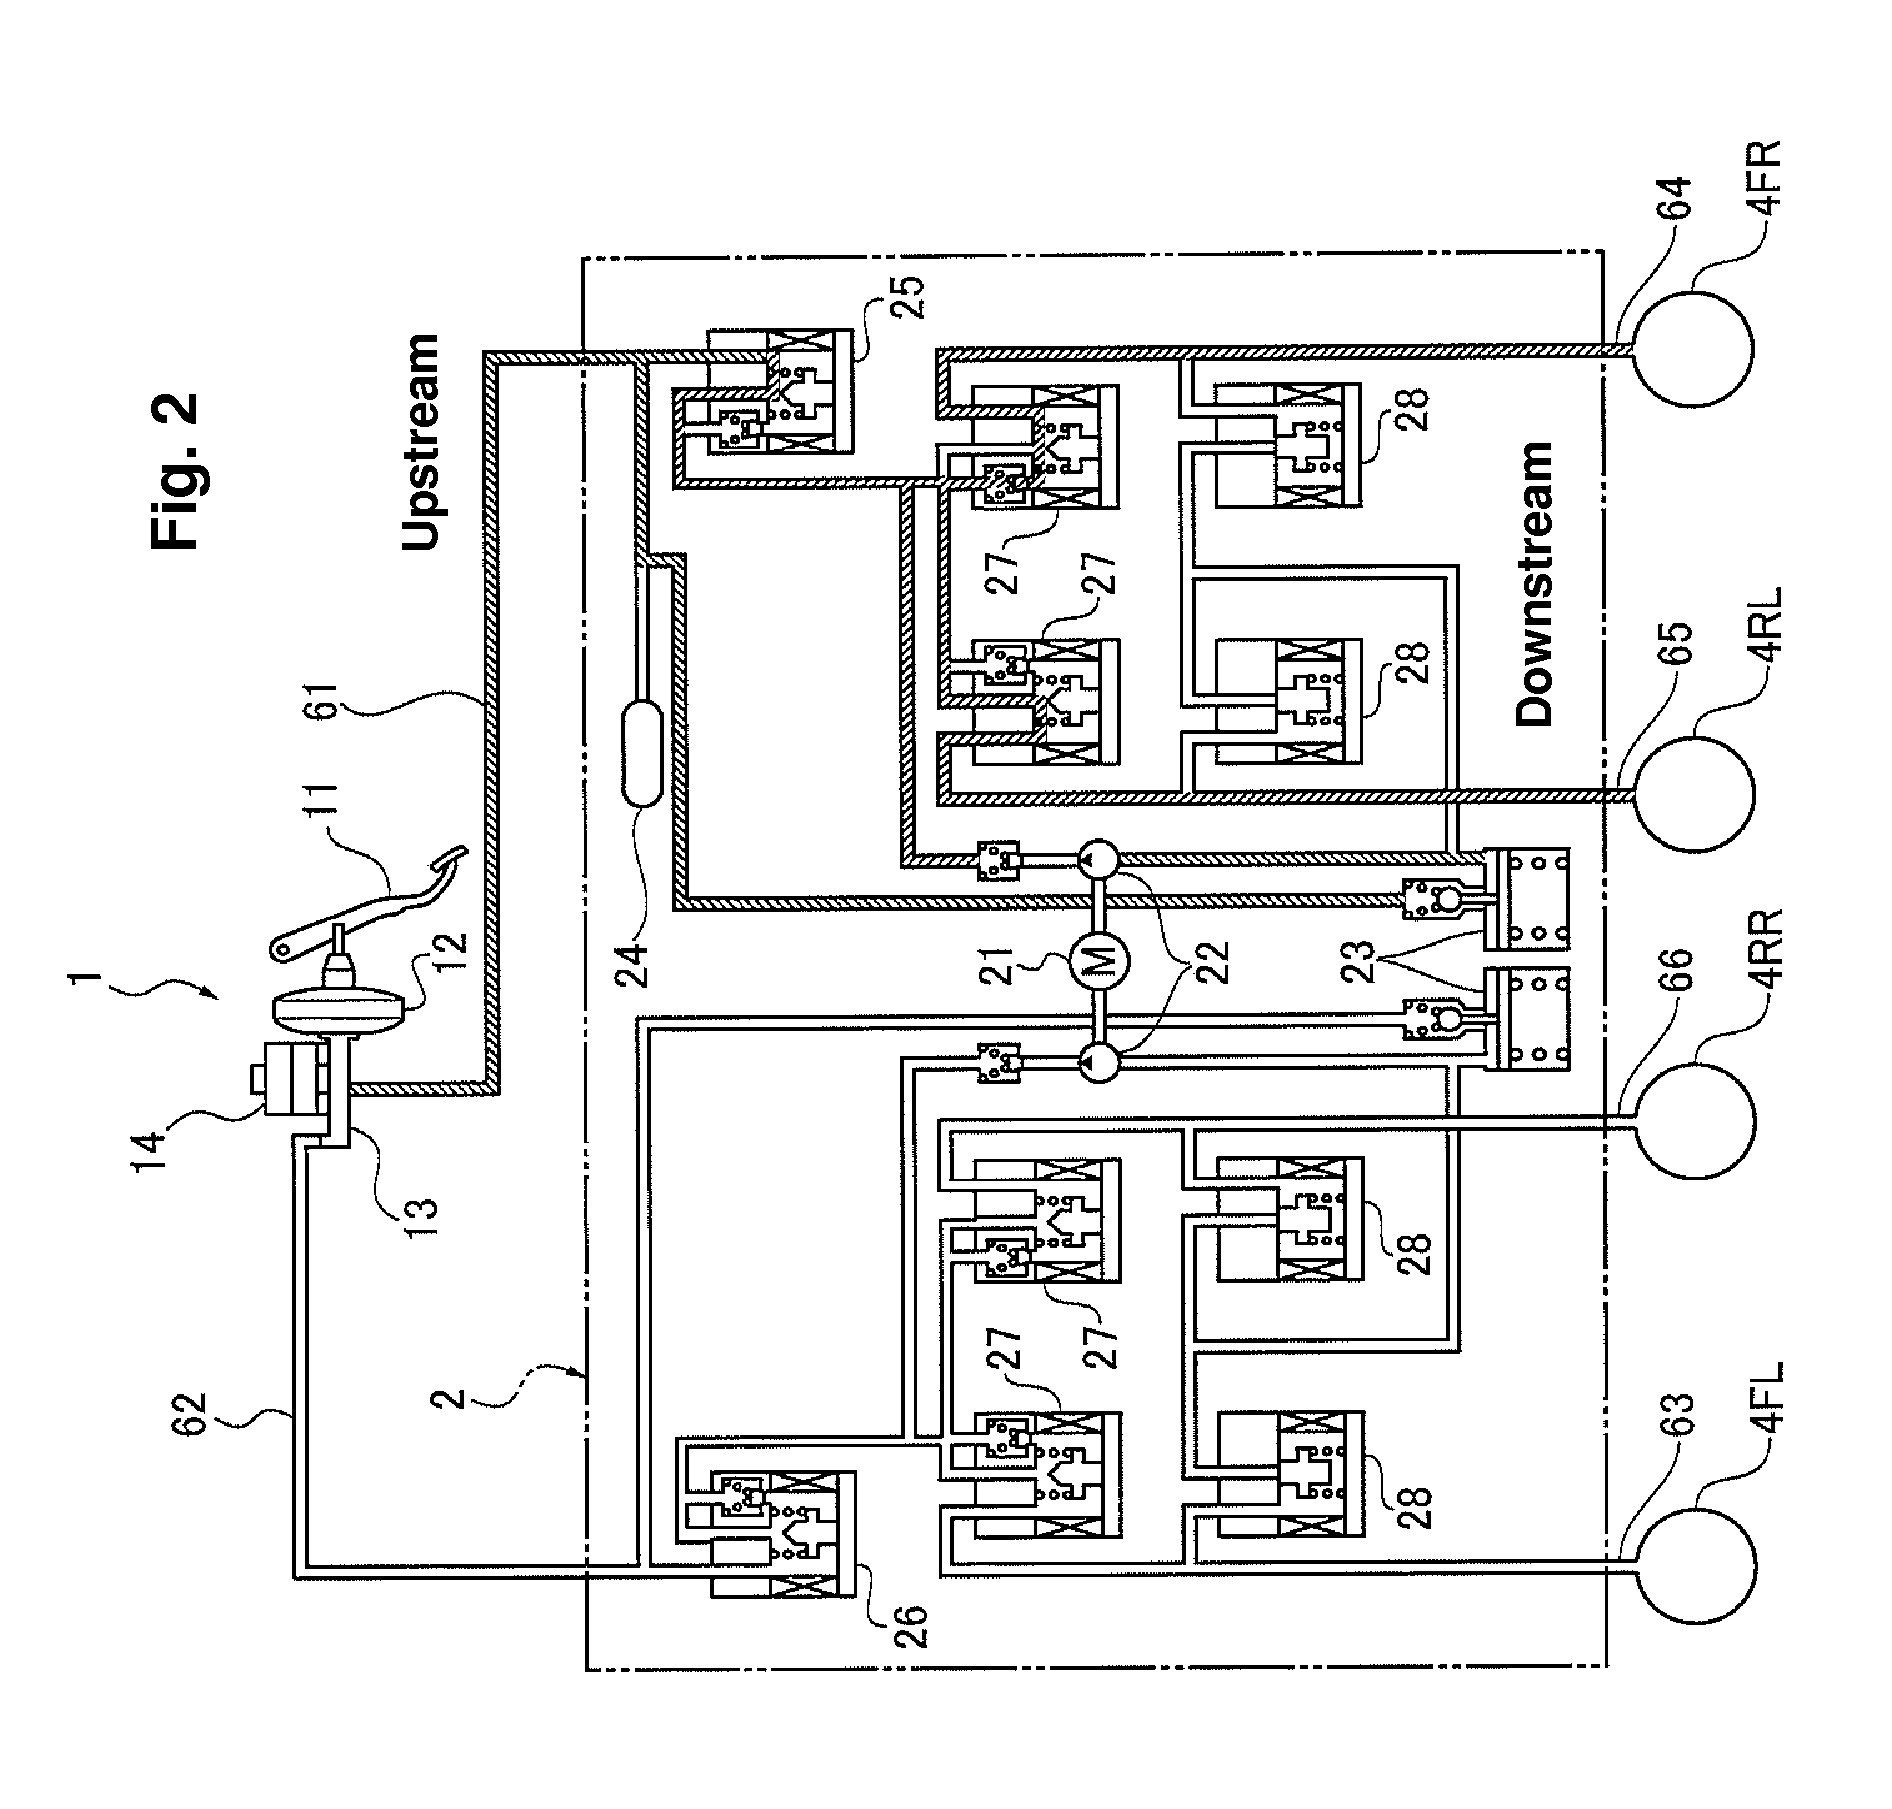 Brake control system for an electrically driven vehicle